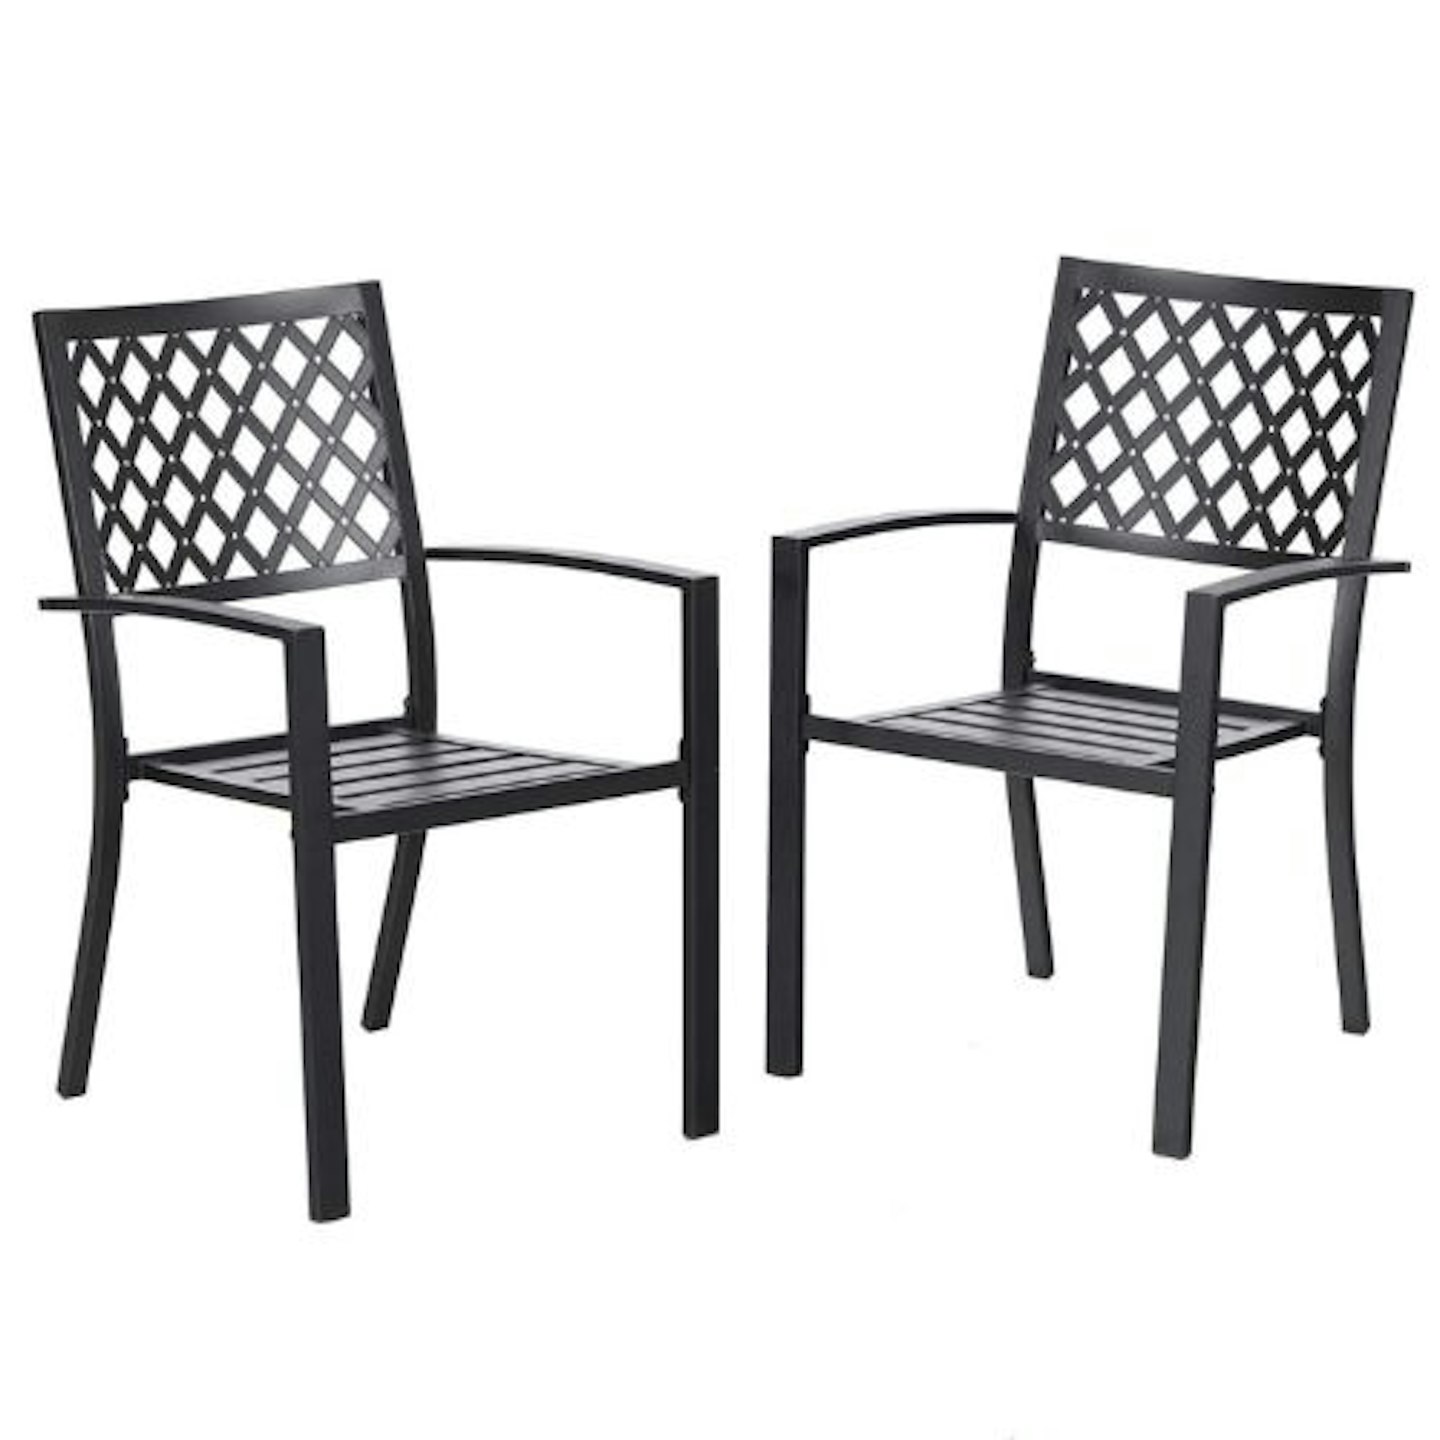 PHI VILLA Wrought Iron Outdoor Chairs